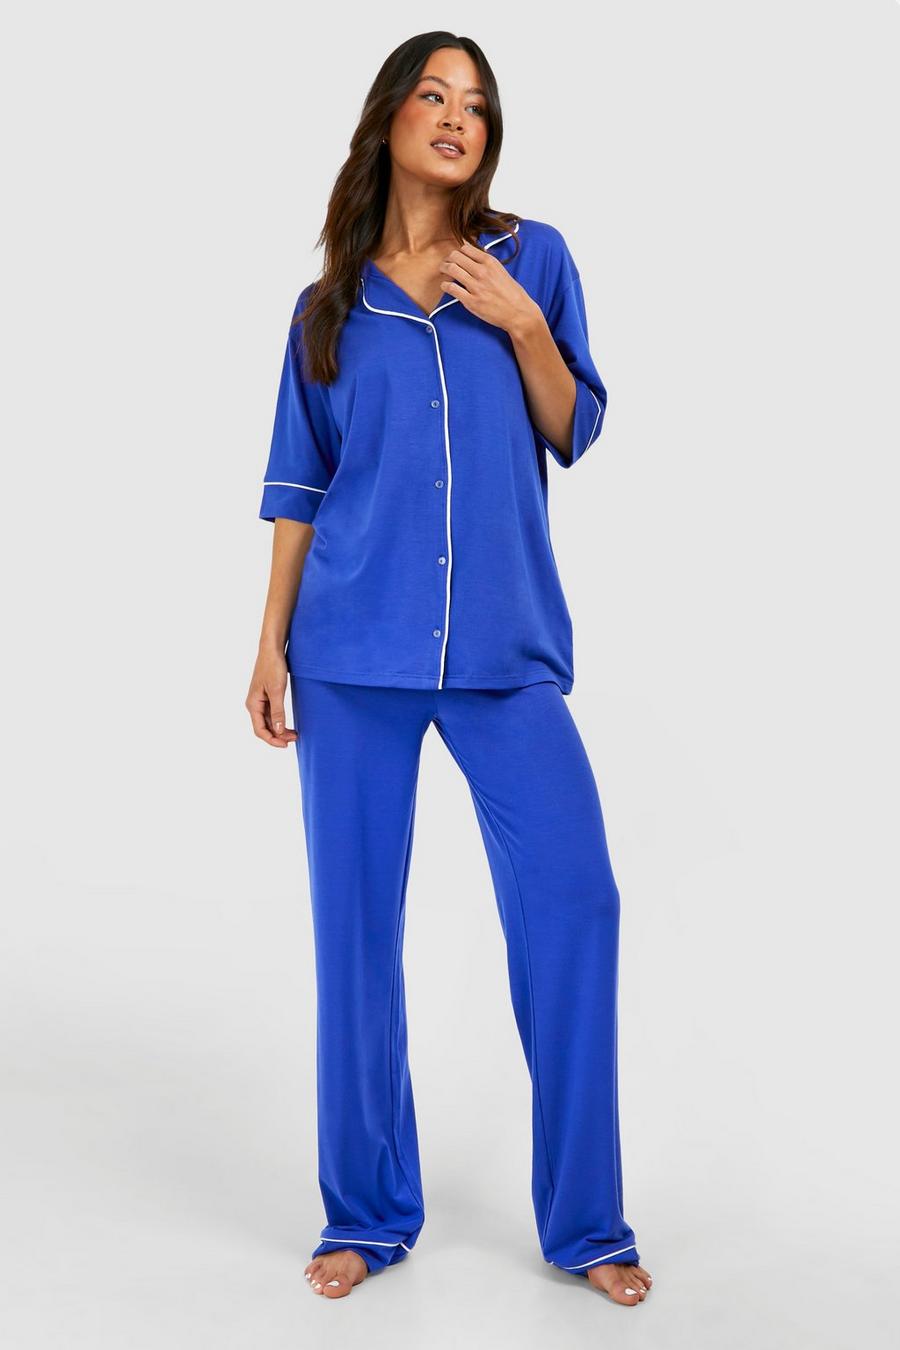 Moroccan blue Tall Jersey Piping Trouser Pj Set